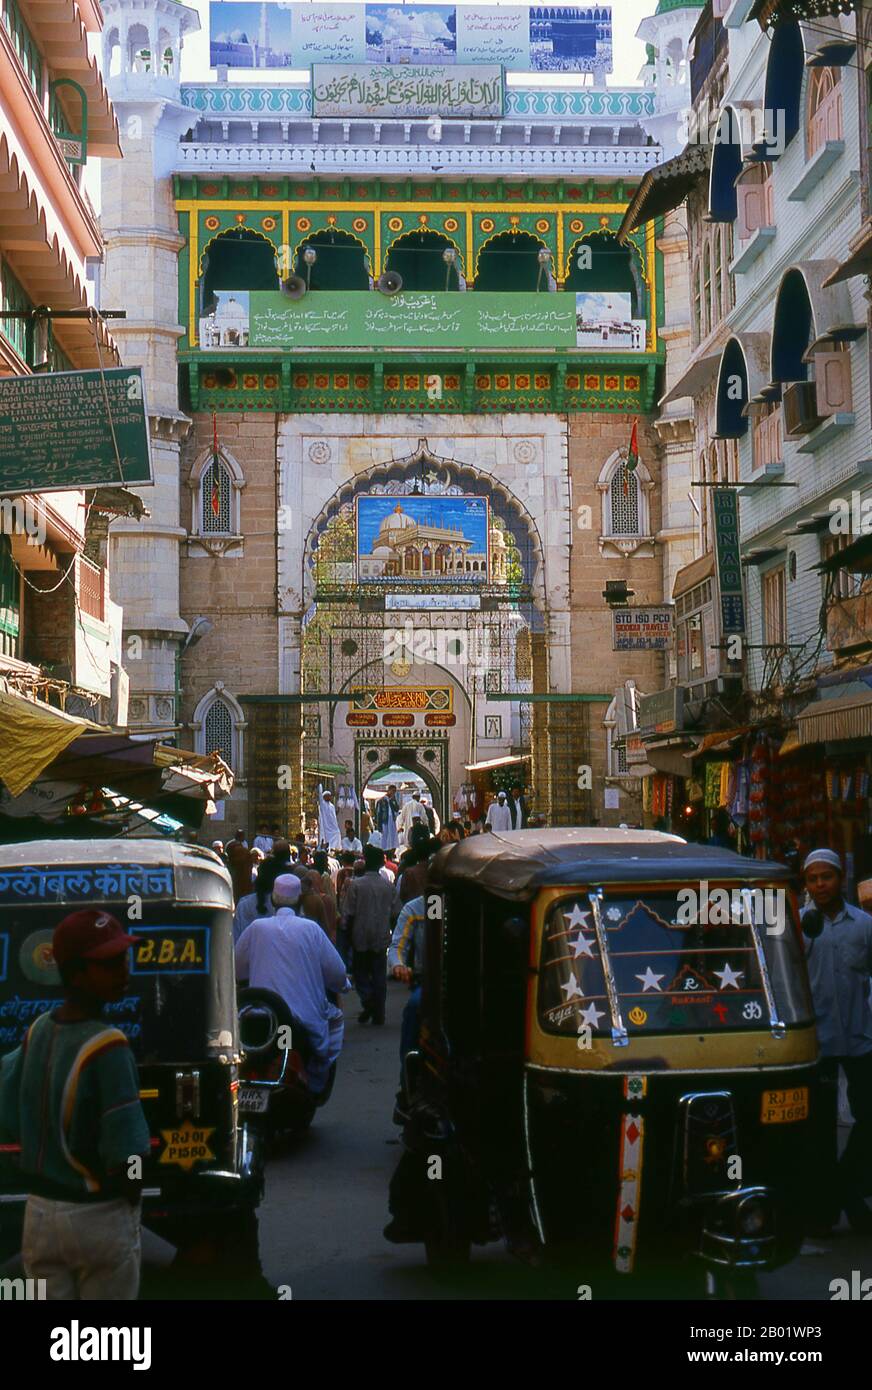 India: The Nizam Gate leading to the Dargah Sharif of Sufi saint Moinuddin Chishti, Ajmer, Rajasthan.  The Nizam Gate was built in 1915 by the Nizam of Hyderabad and leads to the Sufi shrine of Moinuddin Chishti.  Ajmer (Sanskrit: Ajayameru) was founded in the late 7th century CE by Dushyant Chauhan. The Chauhan dynasty ruled Ajmer in spite of repeated invasions by Turkic marauders from Central Asia across the north of India. Ajmer was conquered by Muhammad of Ghor, founder of the Delhi Sultanate, in 1193. However, the Chauhan rulers were allowed autonomy upon the payment of a heavy tribute. Stock Photo